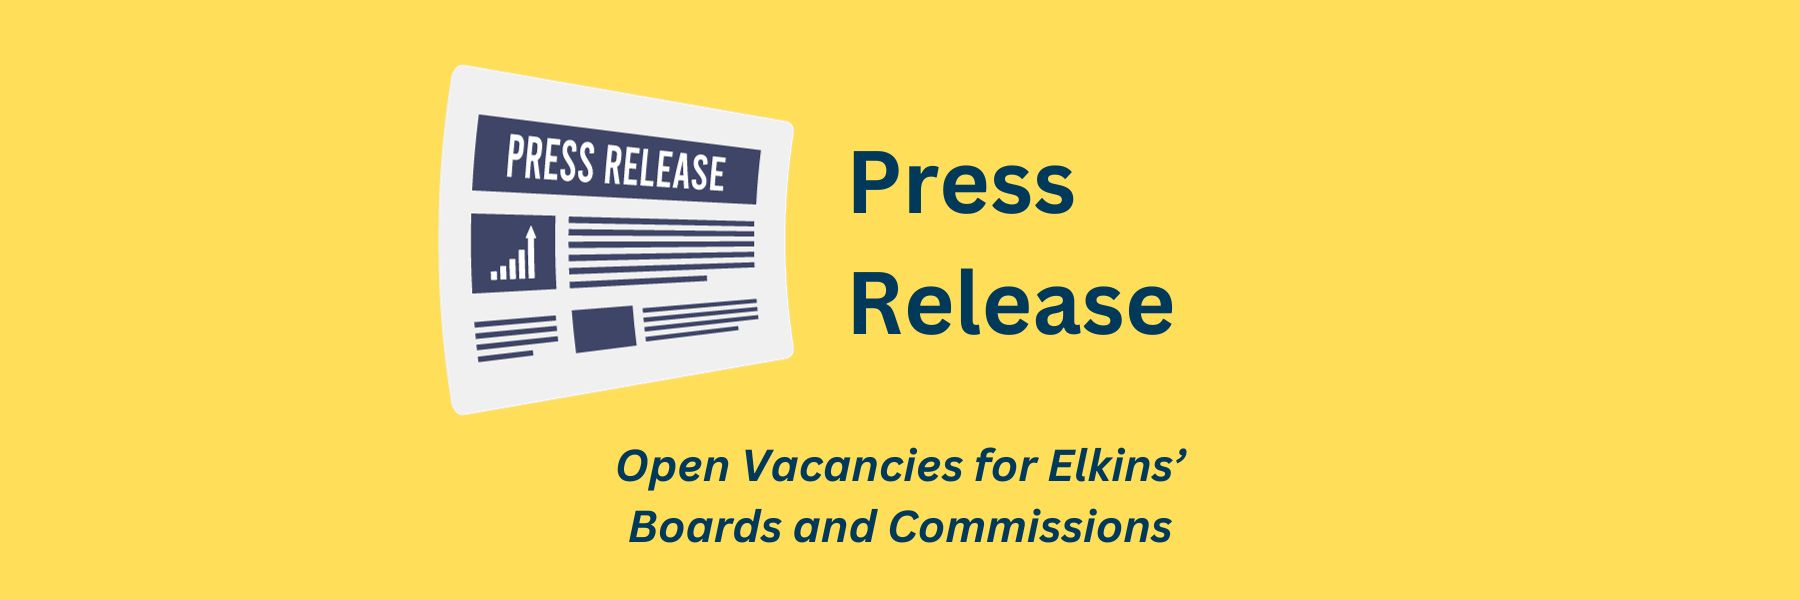 Open Vacancies for Elkins’ Boards and Commissions